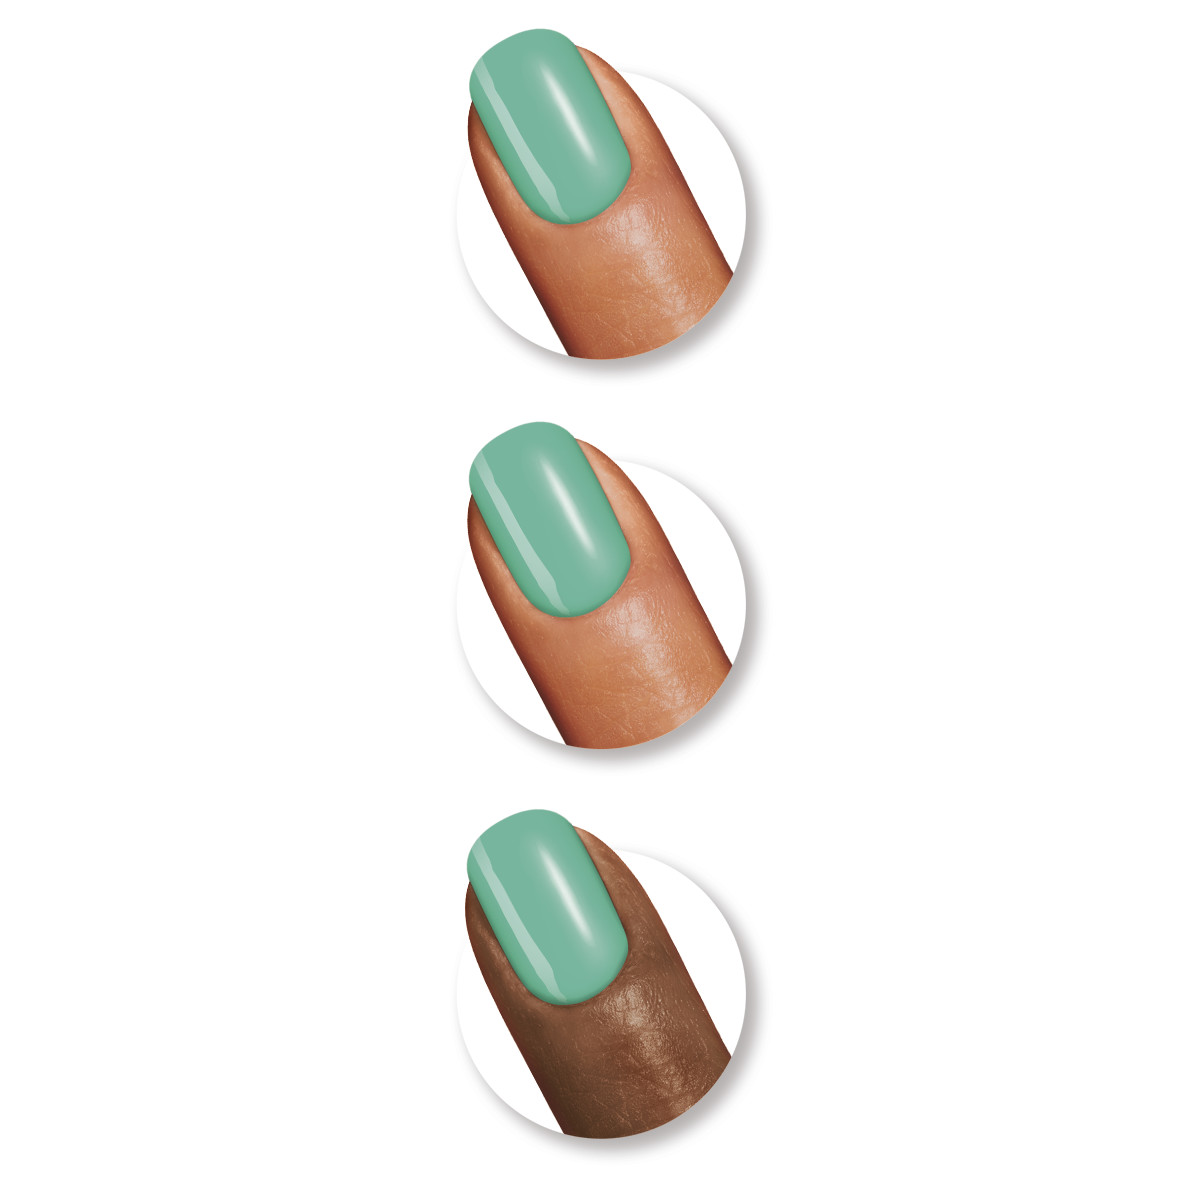 Sally Hansen Complete Salon Manicure Nail Color, Jaded - image 3 of 3